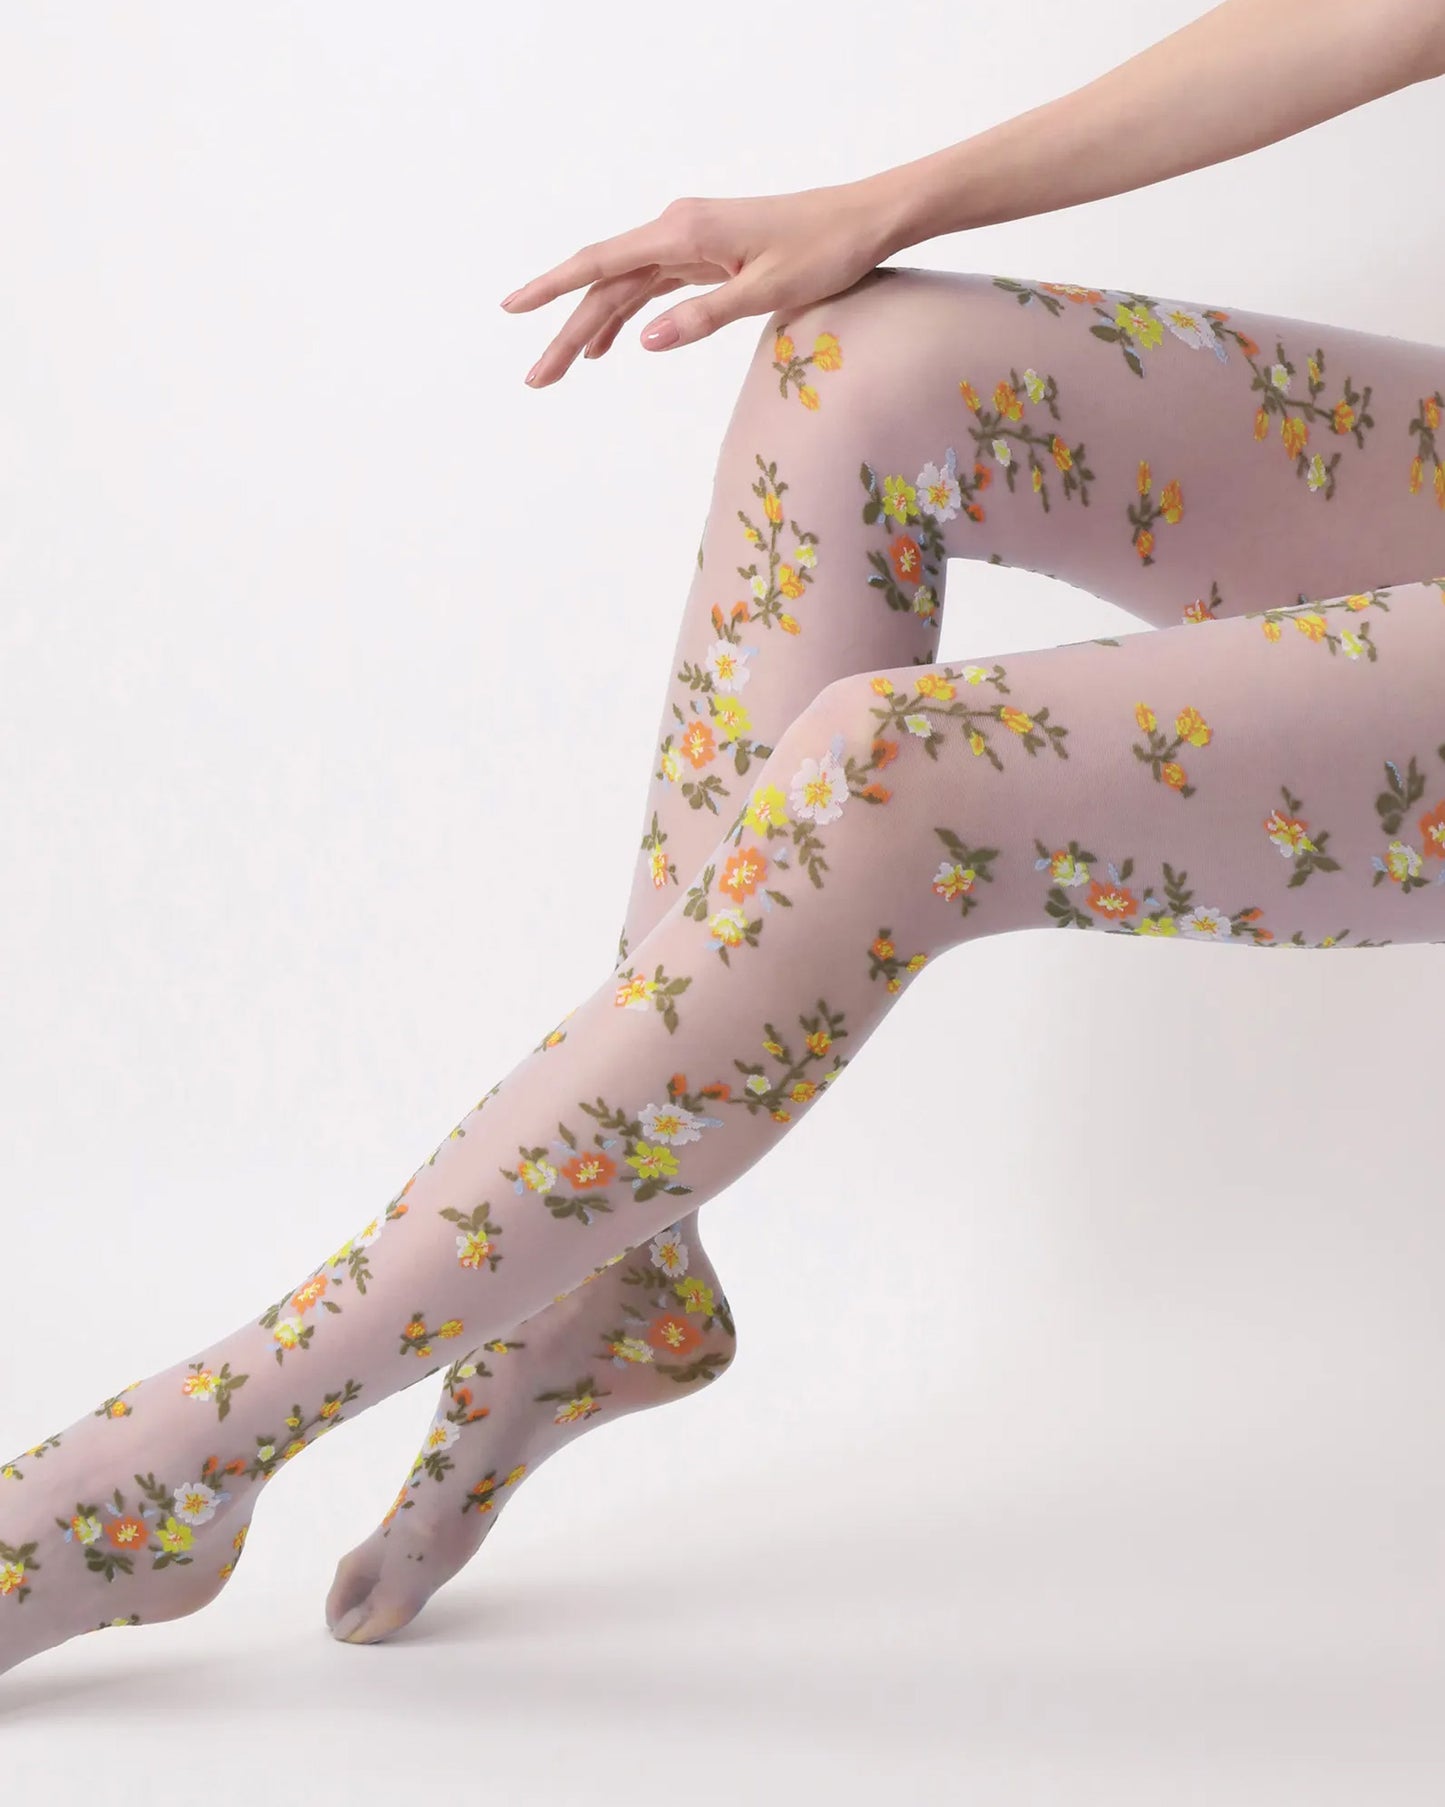 Oroblù Embroidery Collant - Sheer pale blue fashion tights with a multicoloured woven floral pattern of orange, yellow, white and green.